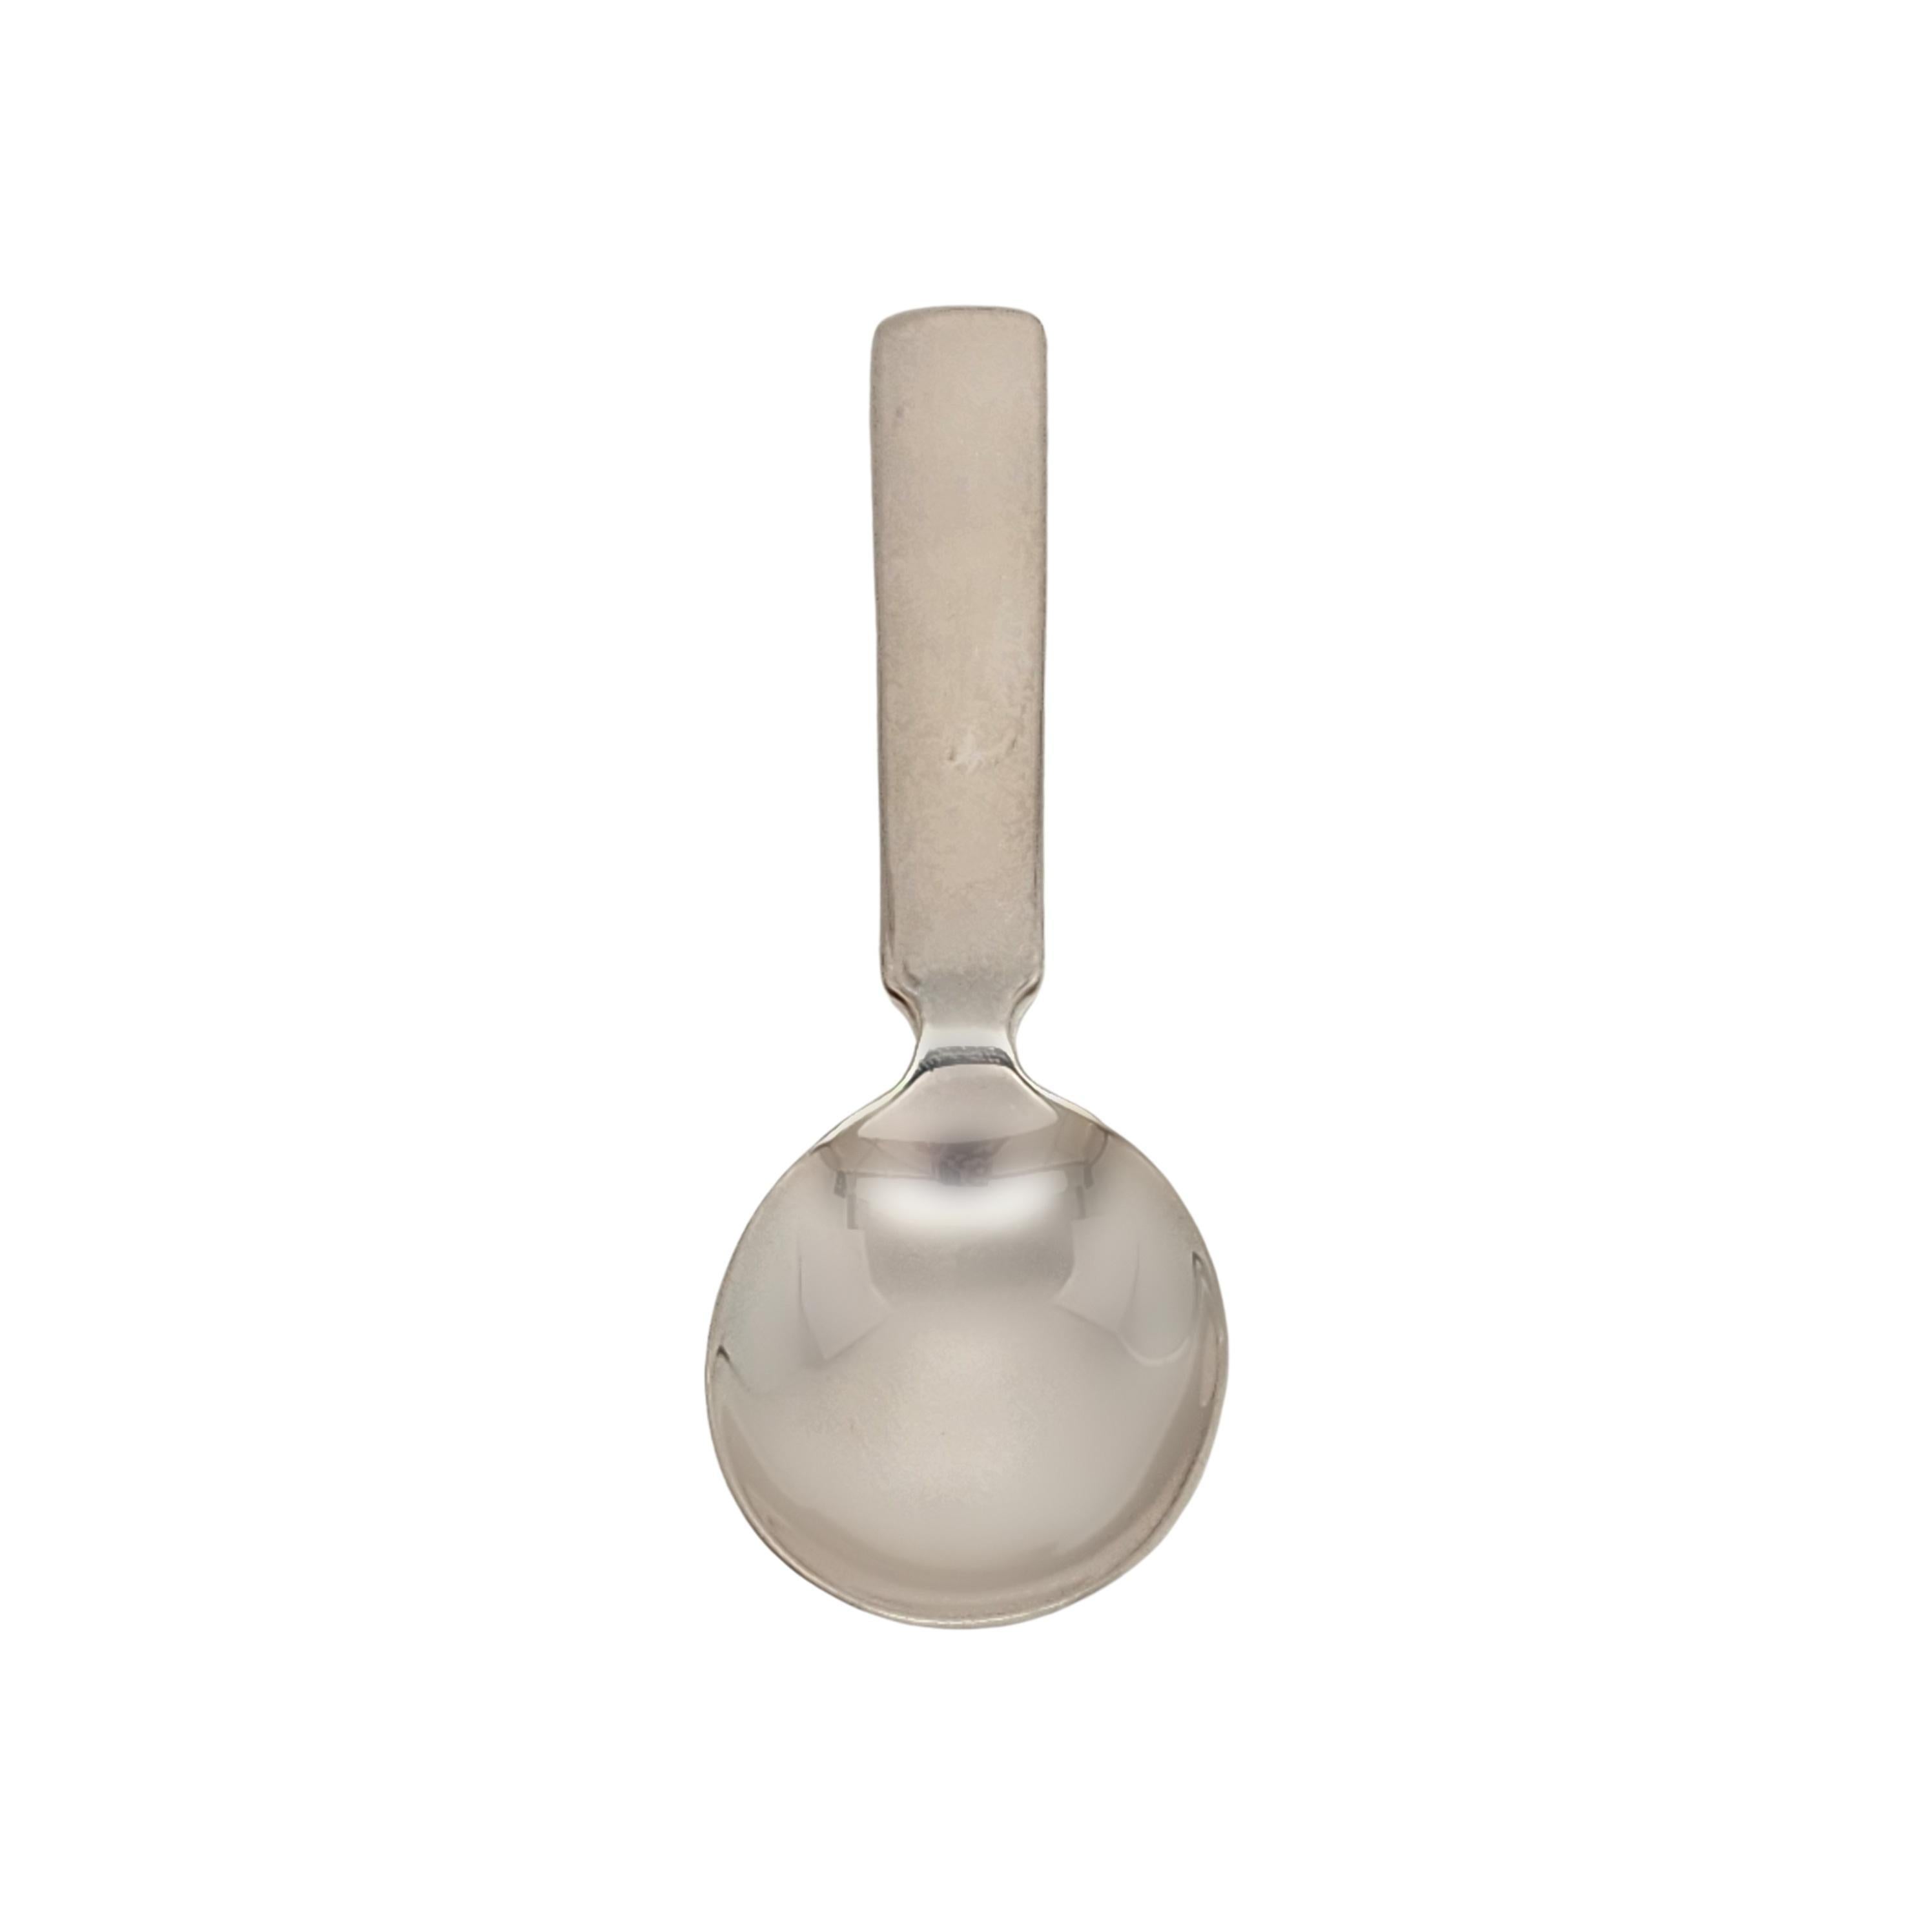 Dominick & Haff for Cartier Sterling Silver Baby Spoon #16712 In Good Condition For Sale In Washington Depot, CT